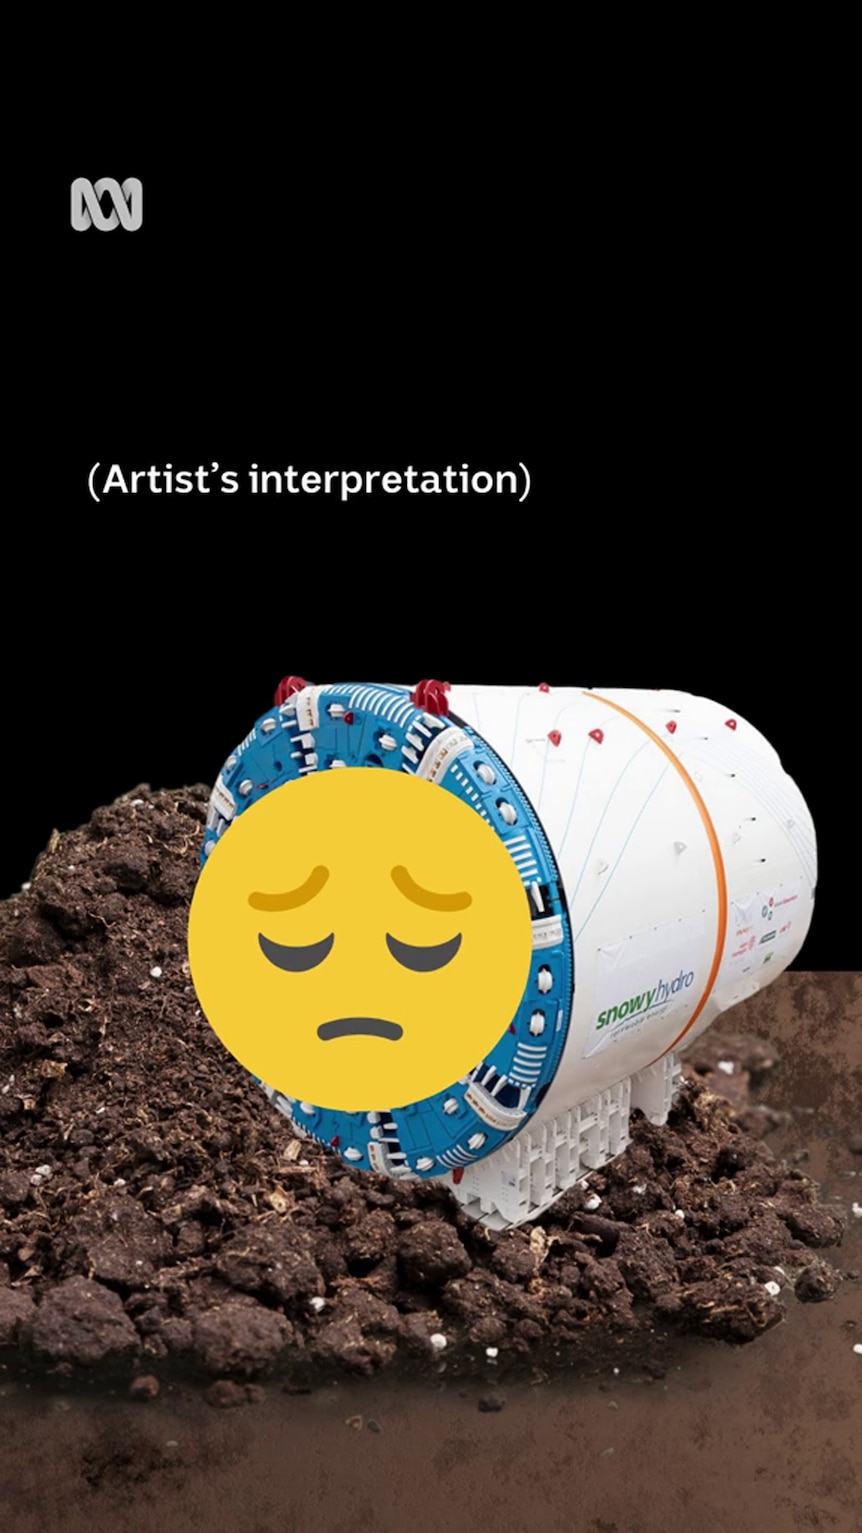 A boring machine is shown underground and has a yellow emoji sad face superimposed on it